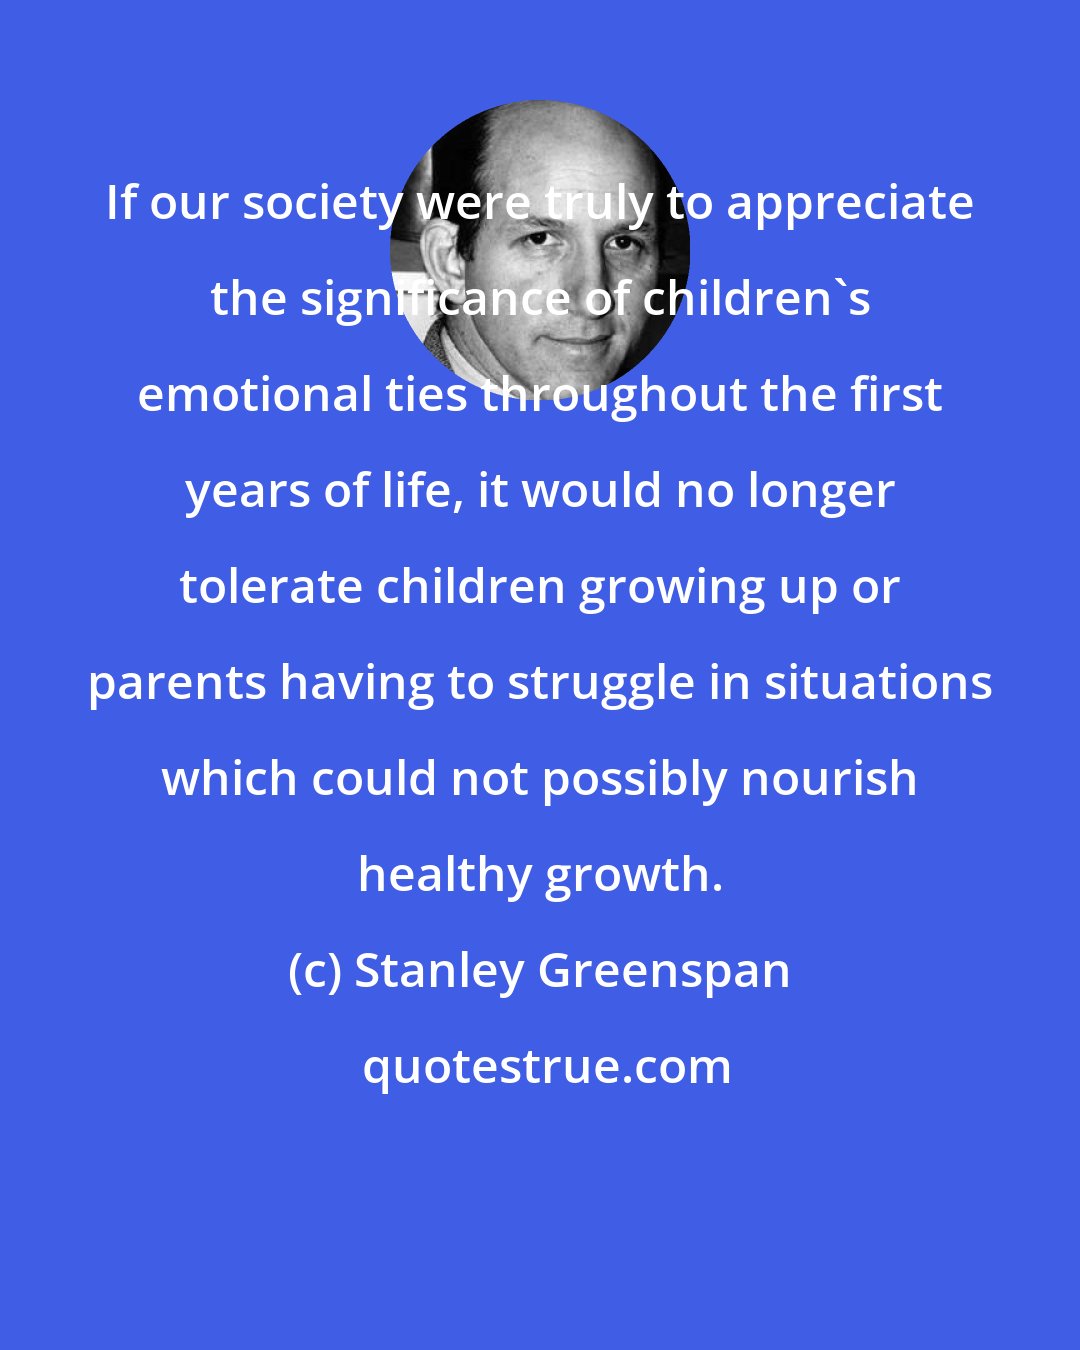 Stanley Greenspan: If our society were truly to appreciate the significance of children's emotional ties throughout the first years of life, it would no longer tolerate children growing up or parents having to struggle in situations which could not possibly nourish healthy growth.